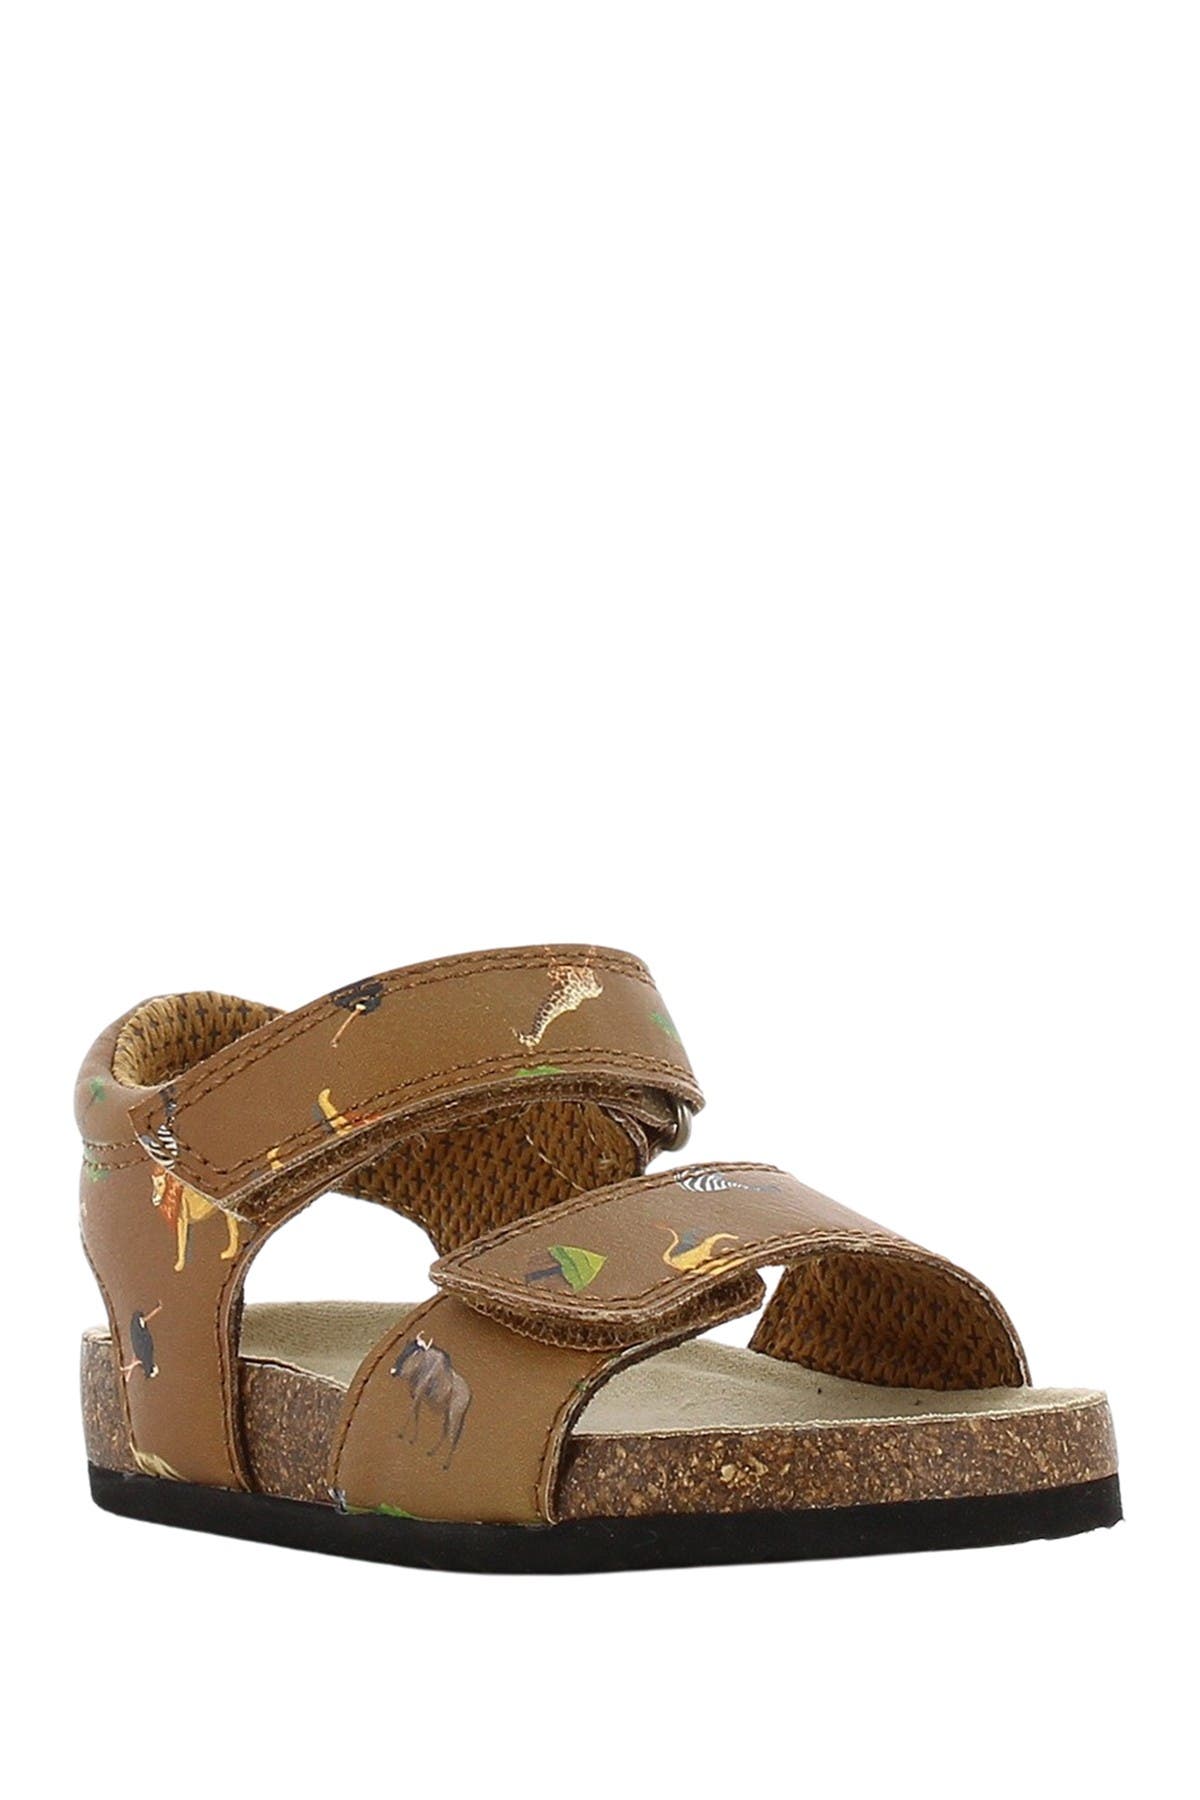 Sprox Kids' The Zoo Double Strap Sandal In Brown